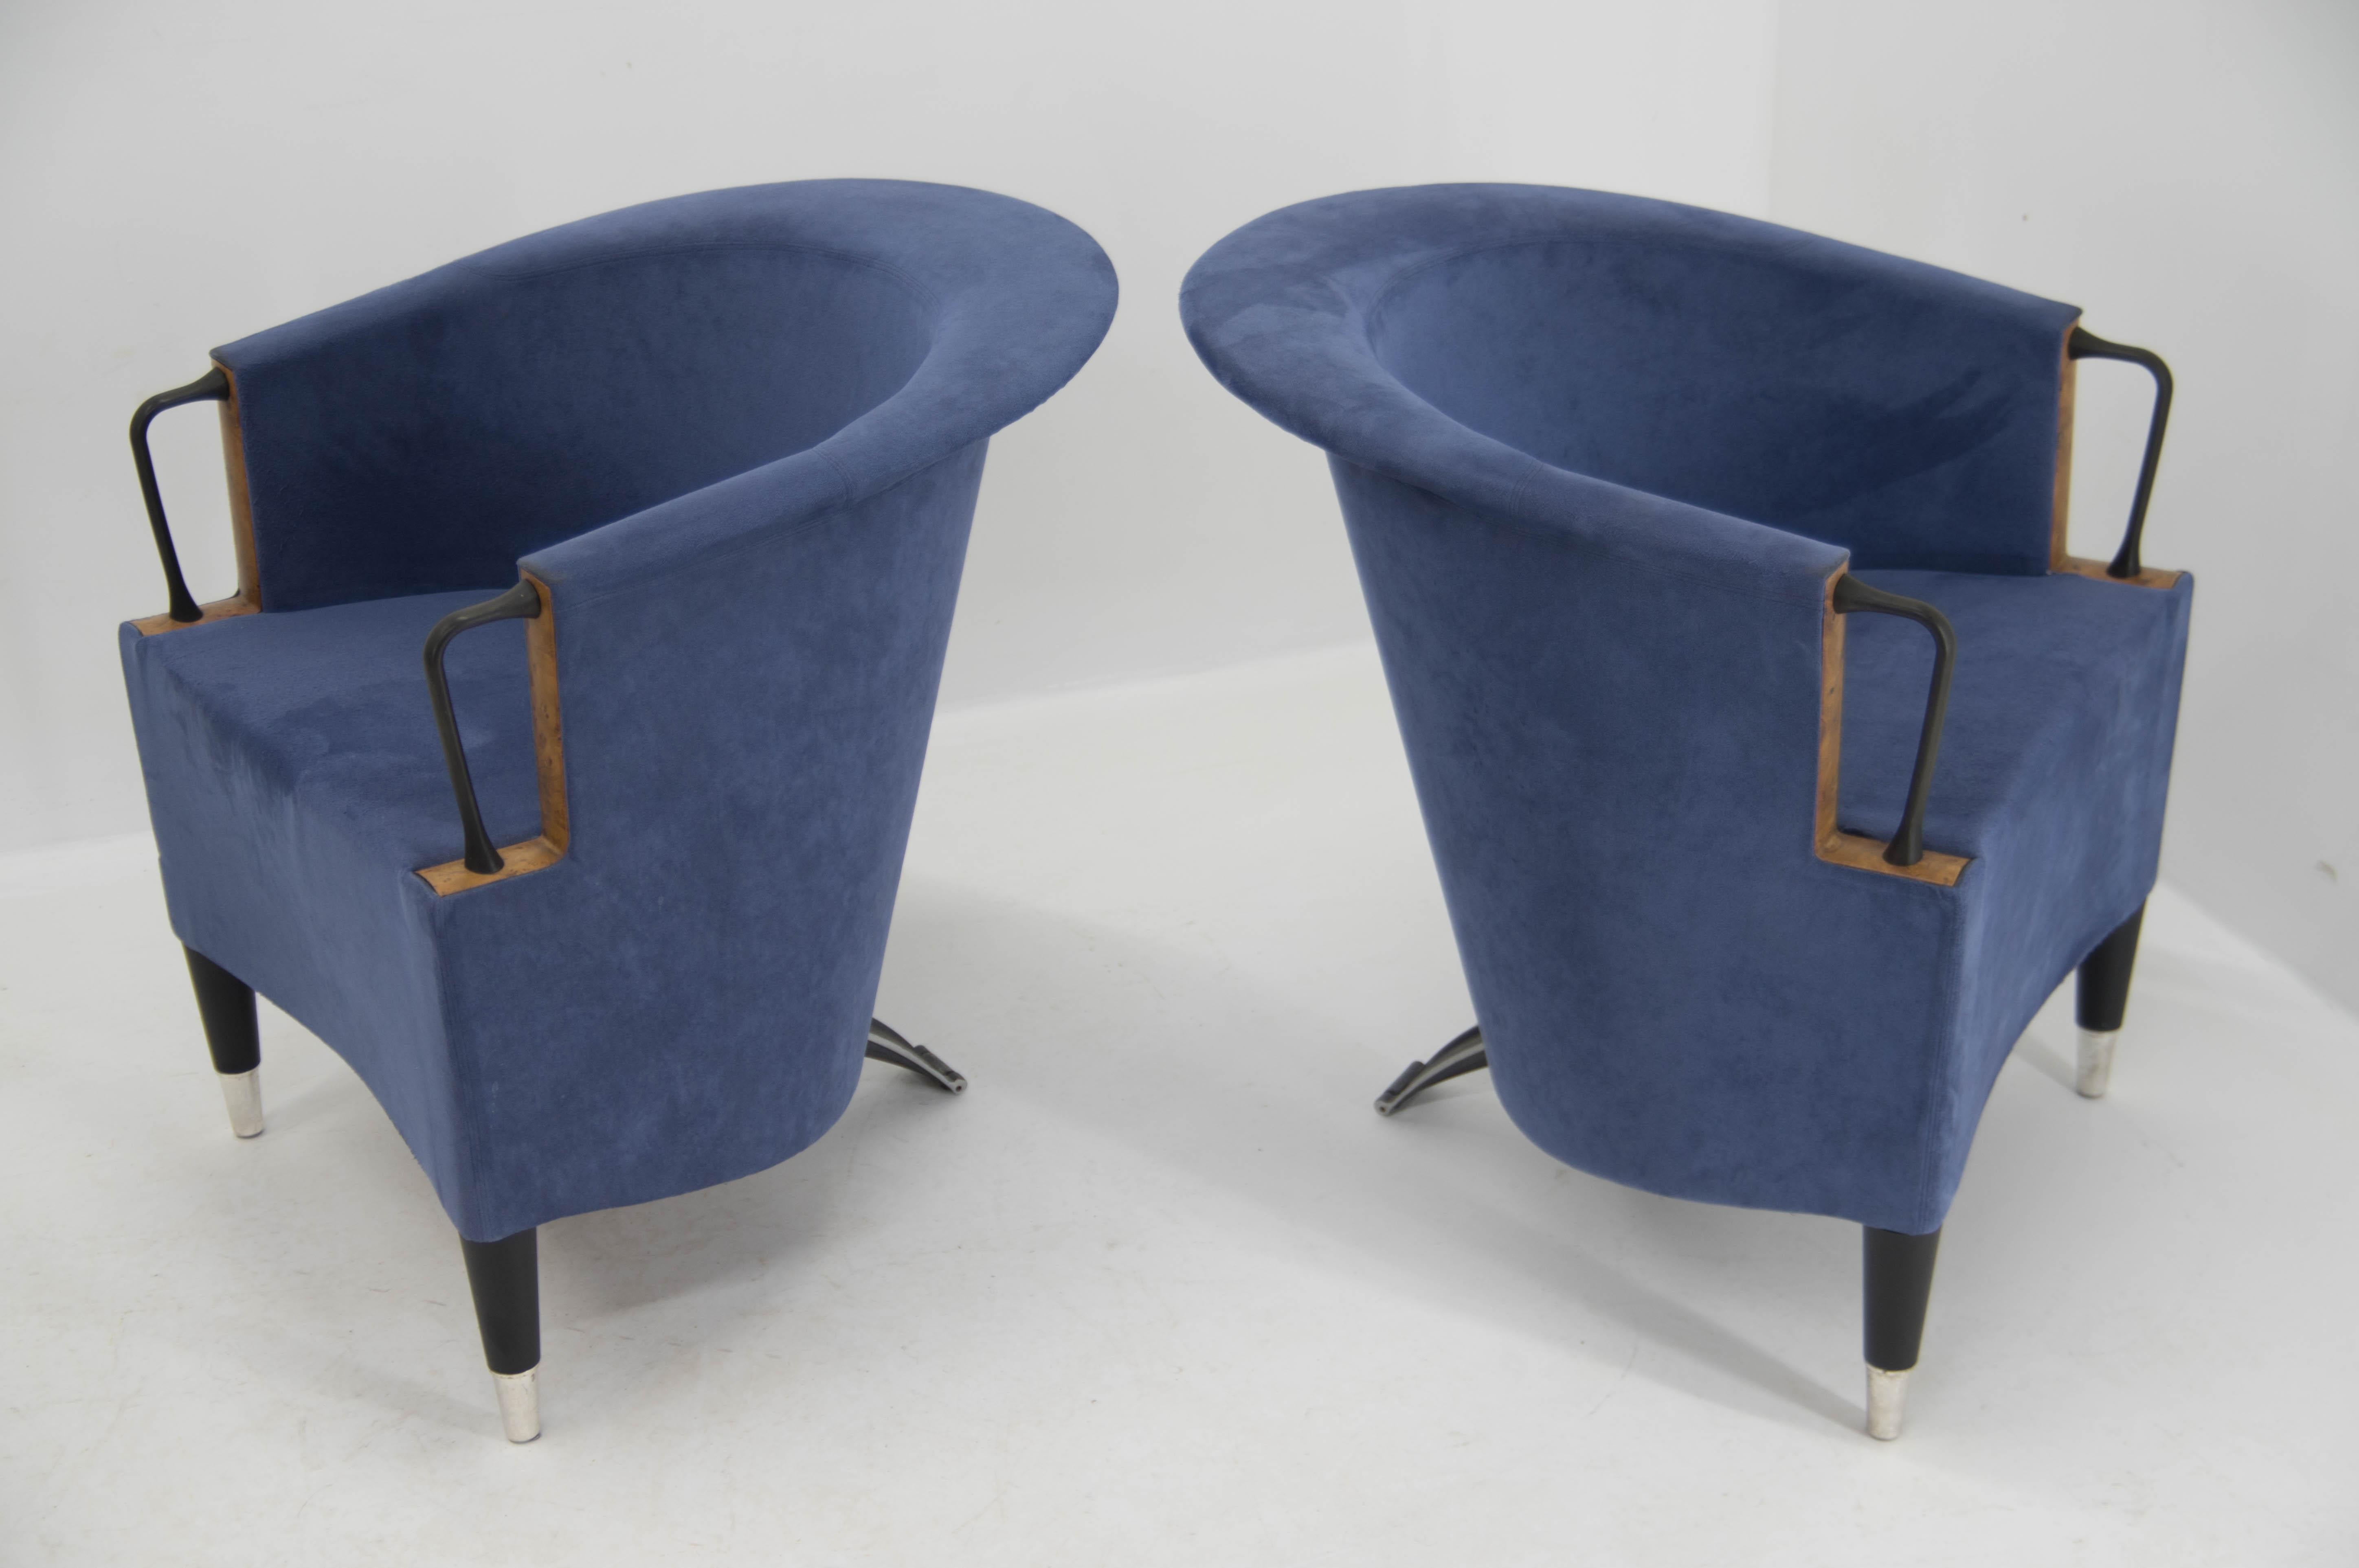 Design armchairs designed by Paolo Piva. The iron mechanism on the back leg allows easy movement of the chair on the floor. Very good original condition.